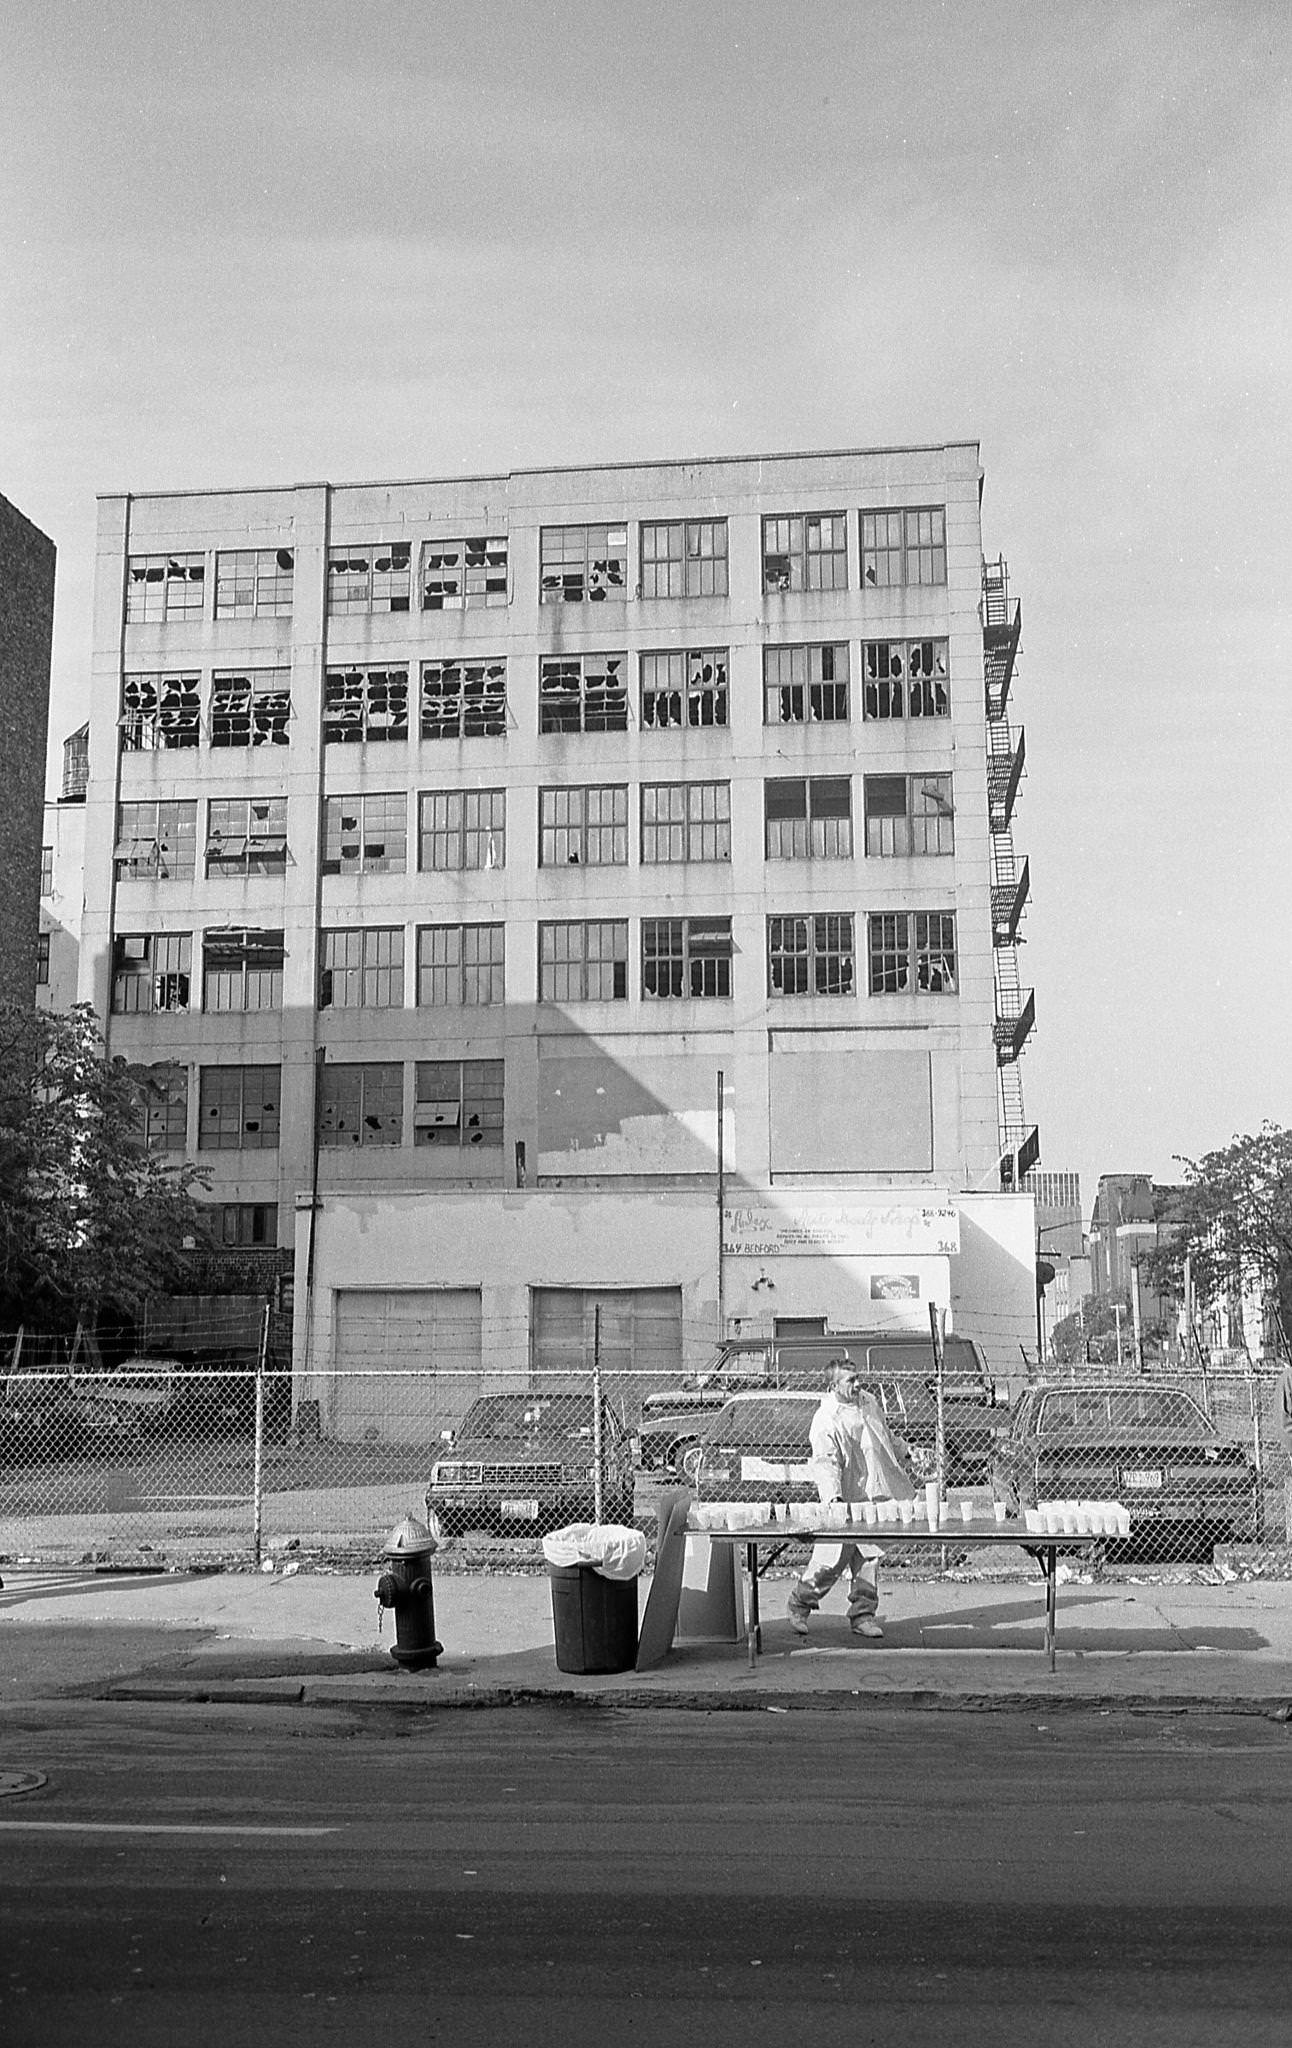 Abandoned Building On South 4Th Street In Williamsburg, Brooklyn, 1992